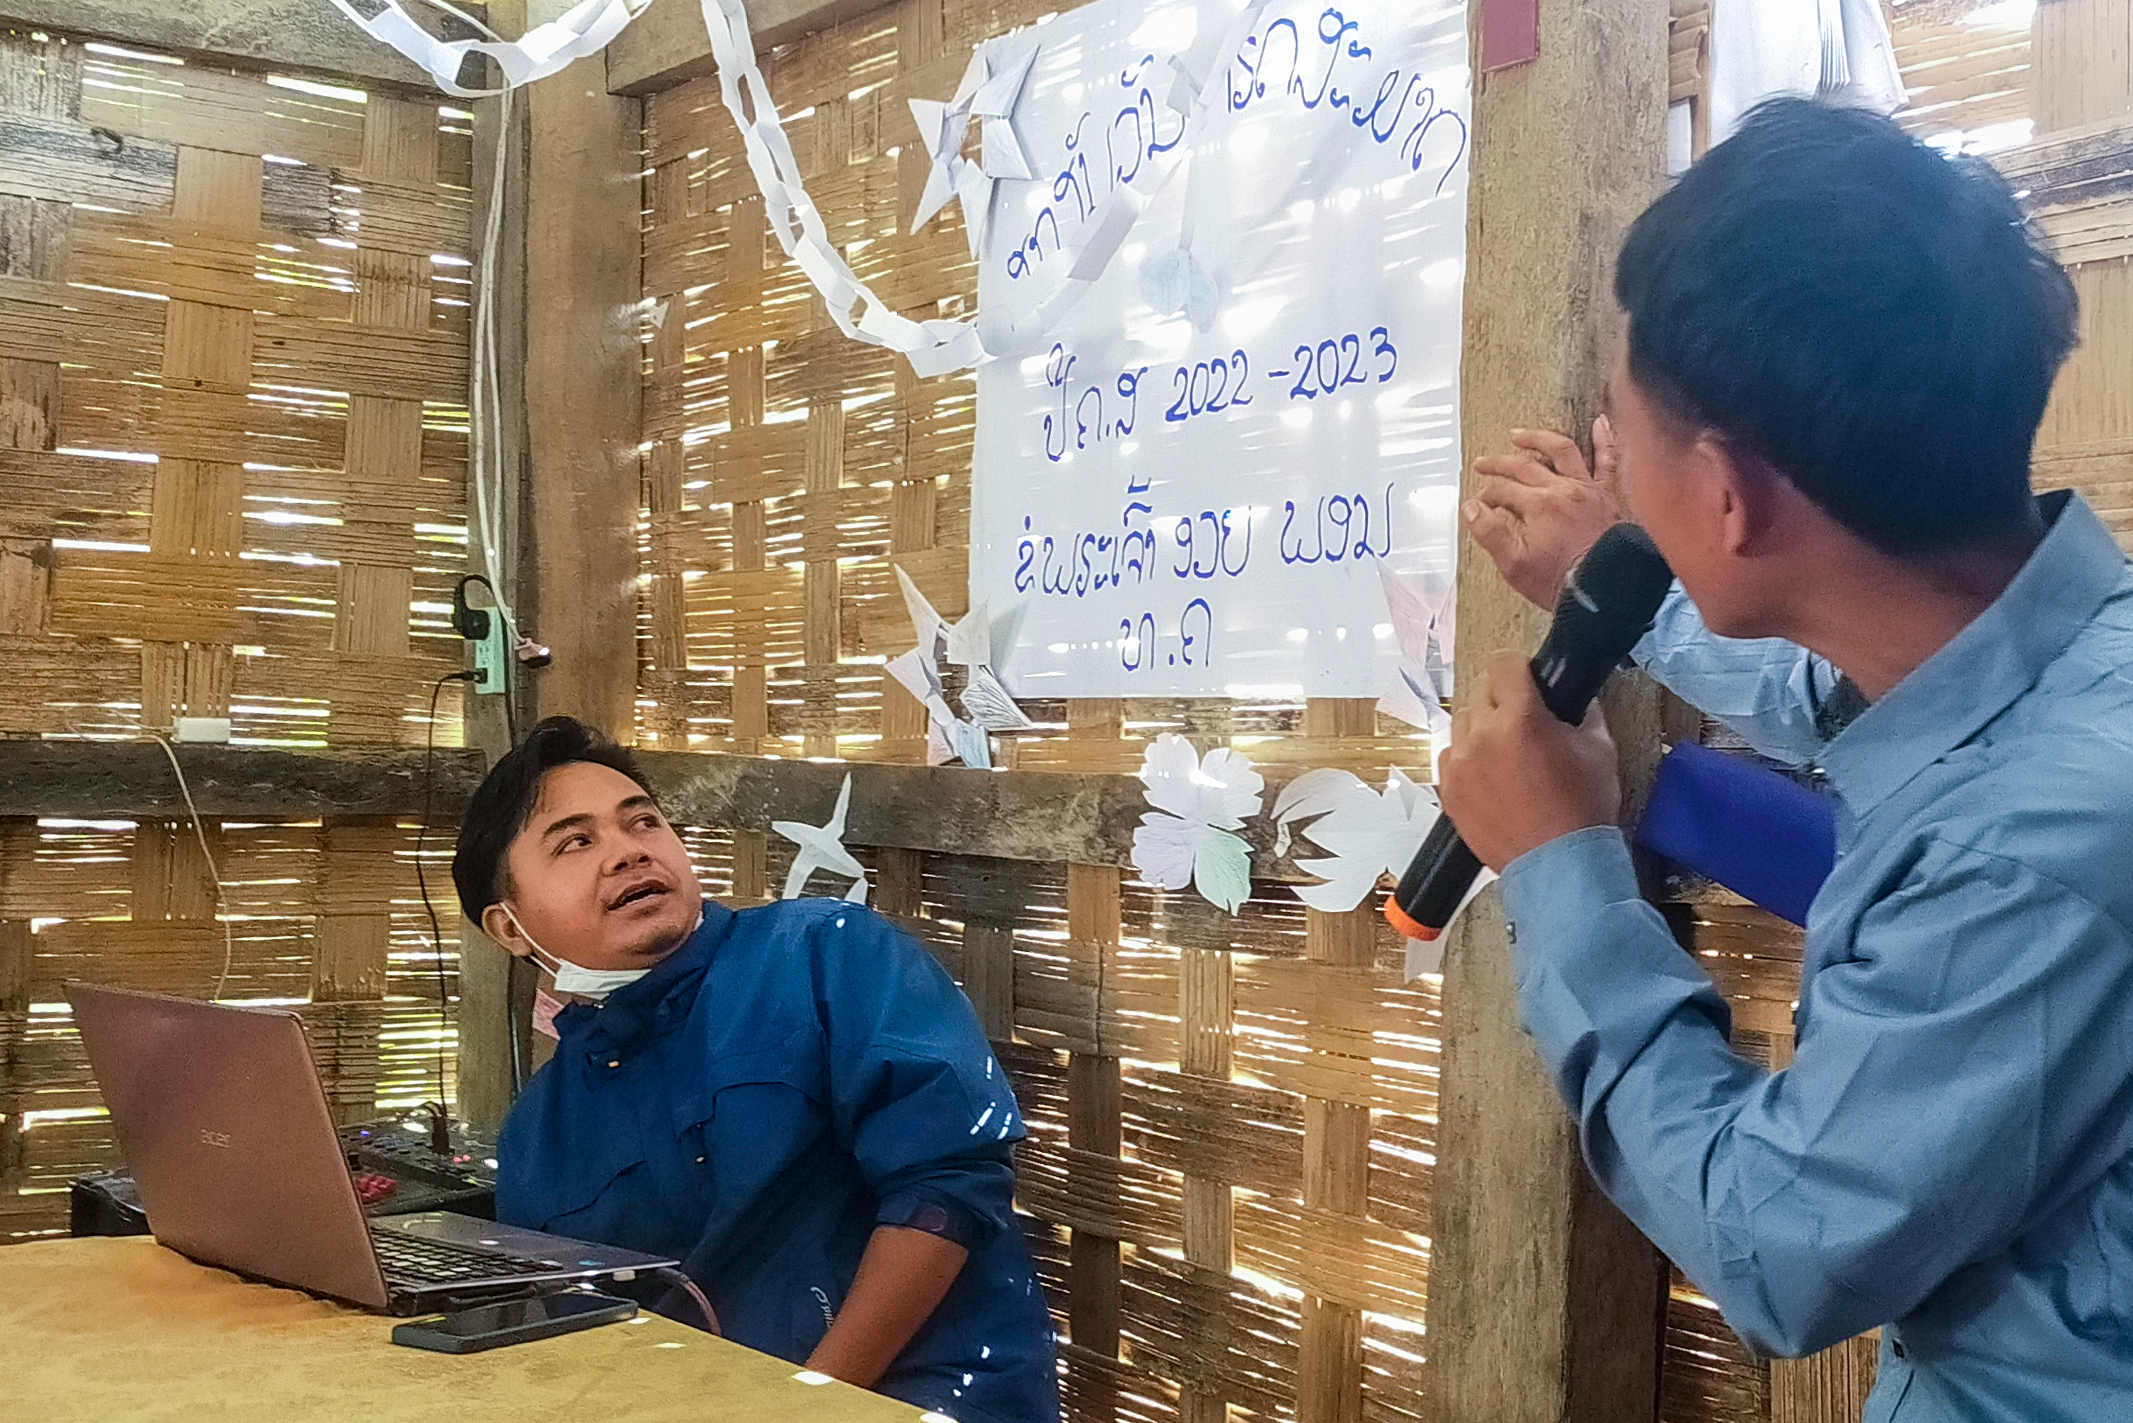 Laotian Christian points a sign while speaking through a microphone while another man works on the electronic equipment